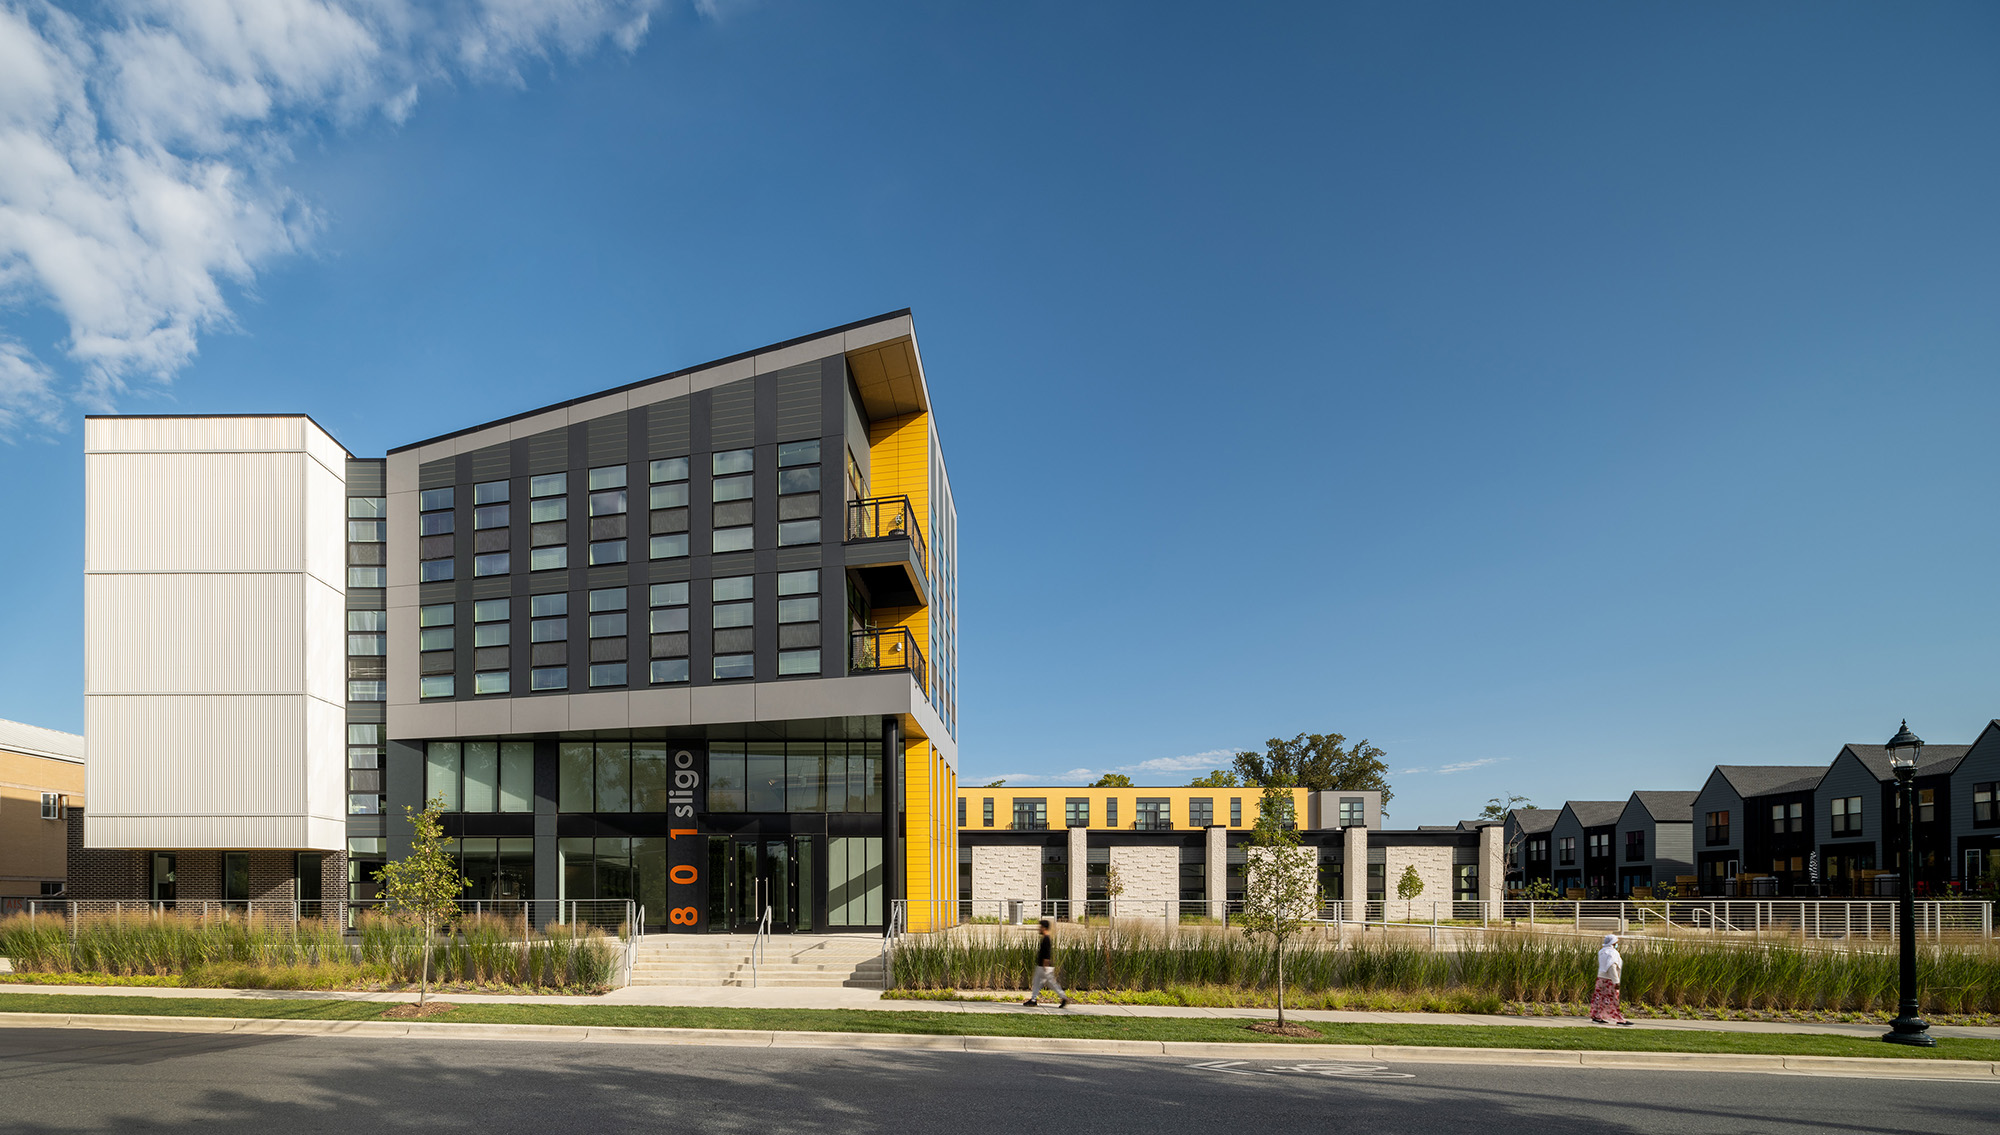 BKV Group’s Artspace Silver Spring affordable housing community